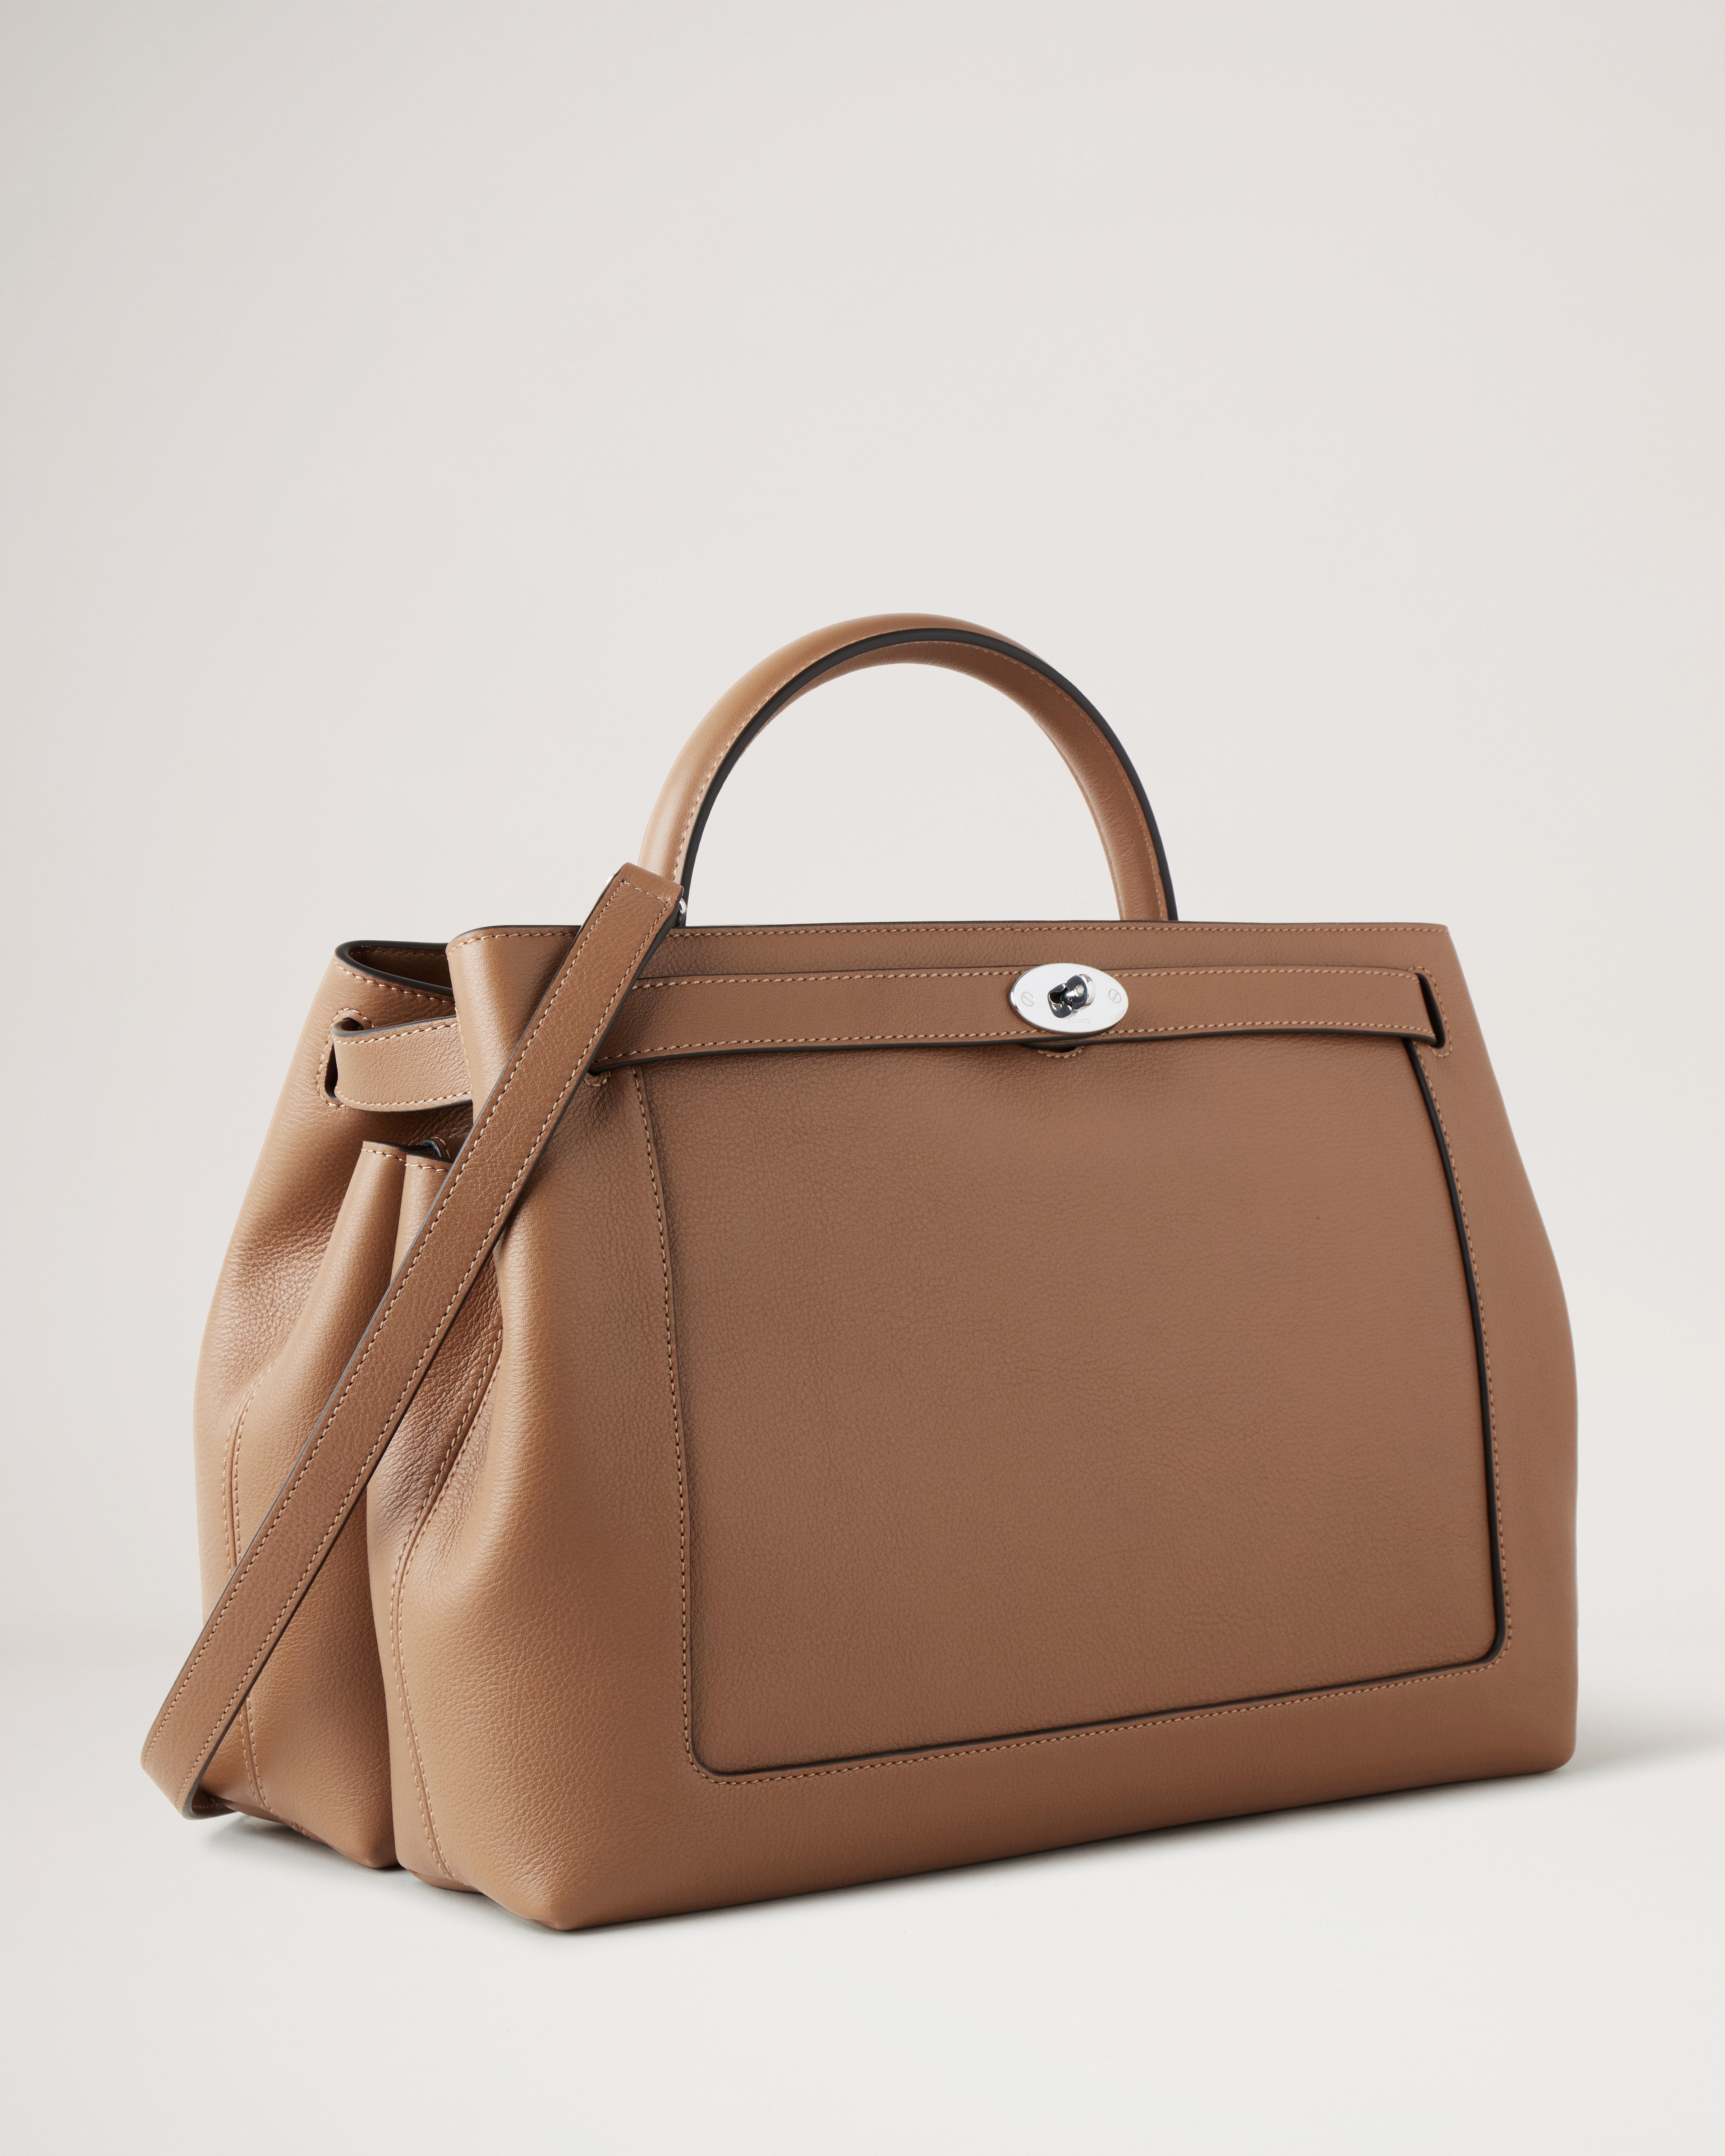 Get Ready For The New Hermes Bag? A Herbag Zip Lookalike?